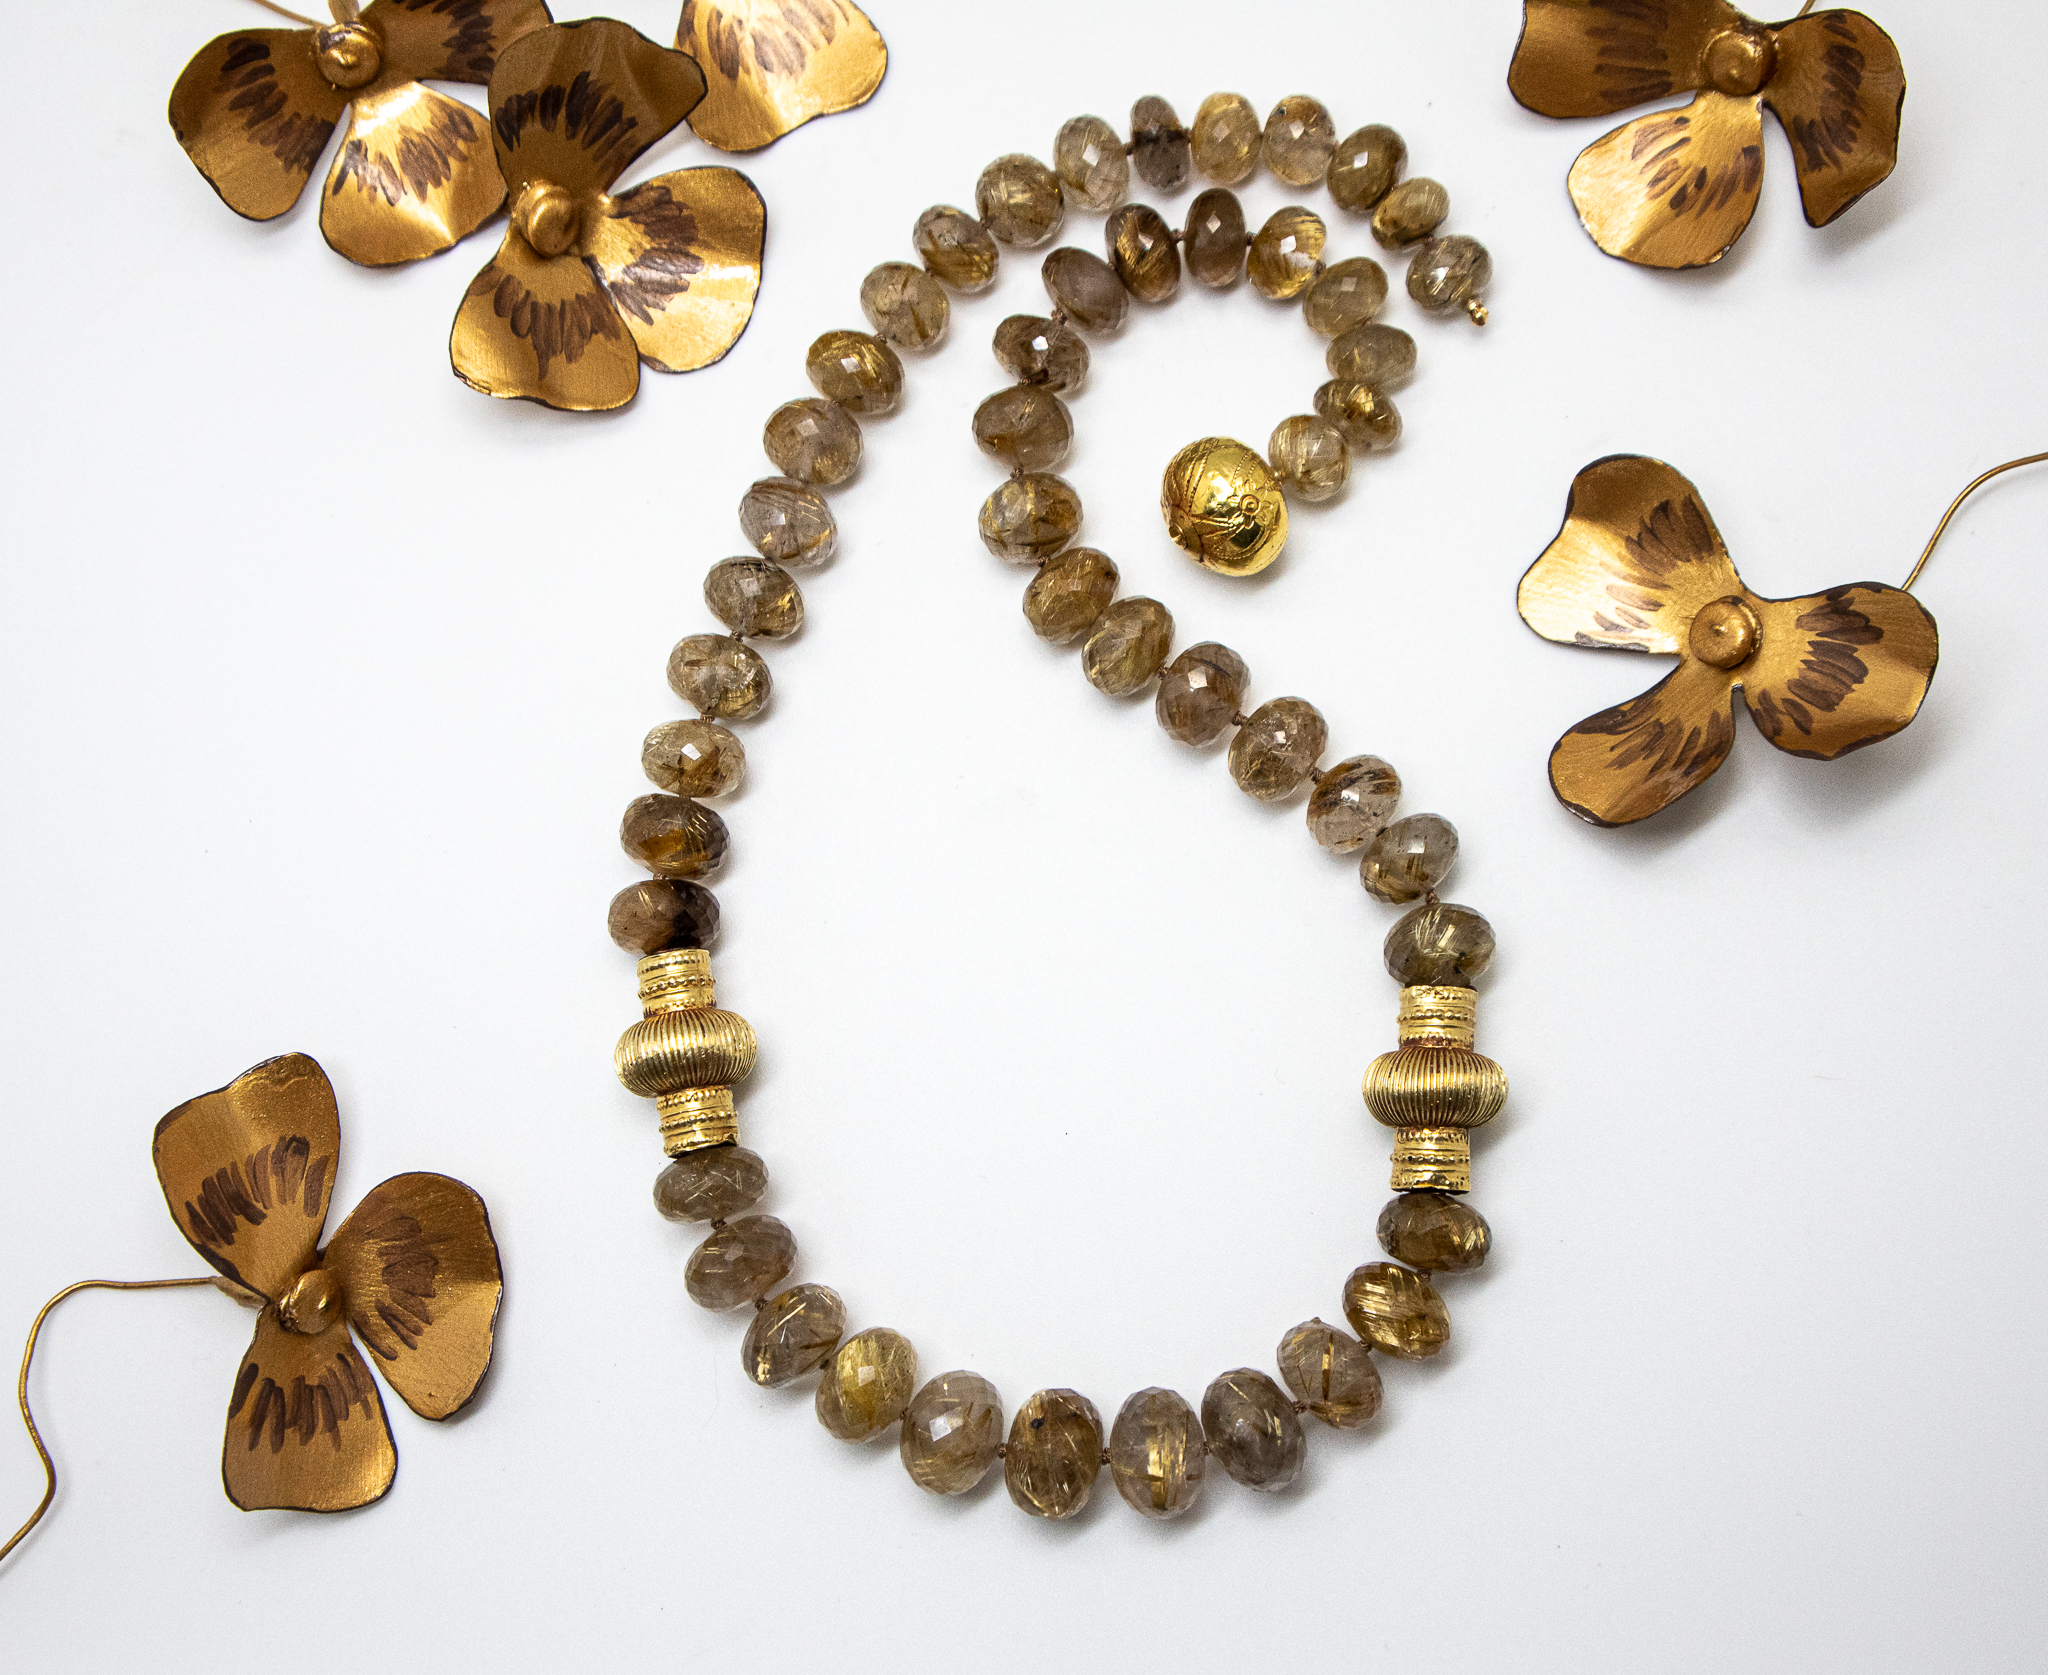 Rutilated Quartz bead necklace shown with metal flowers